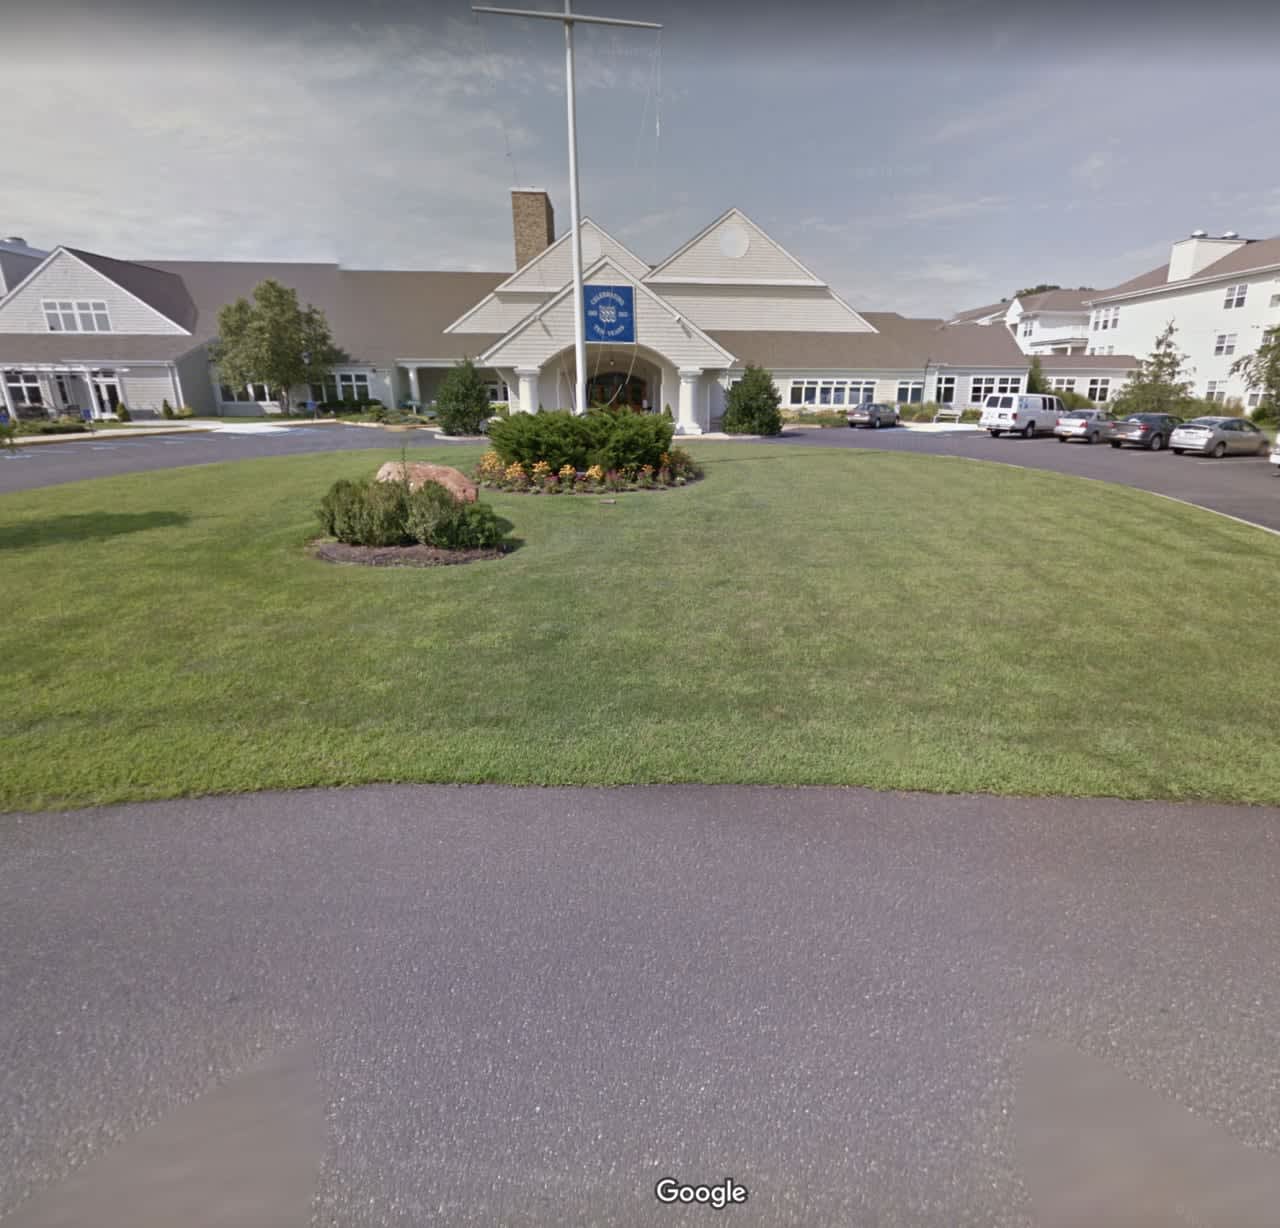 Three residents of the Peconic Landing Retirement Home have died from COVID-19.